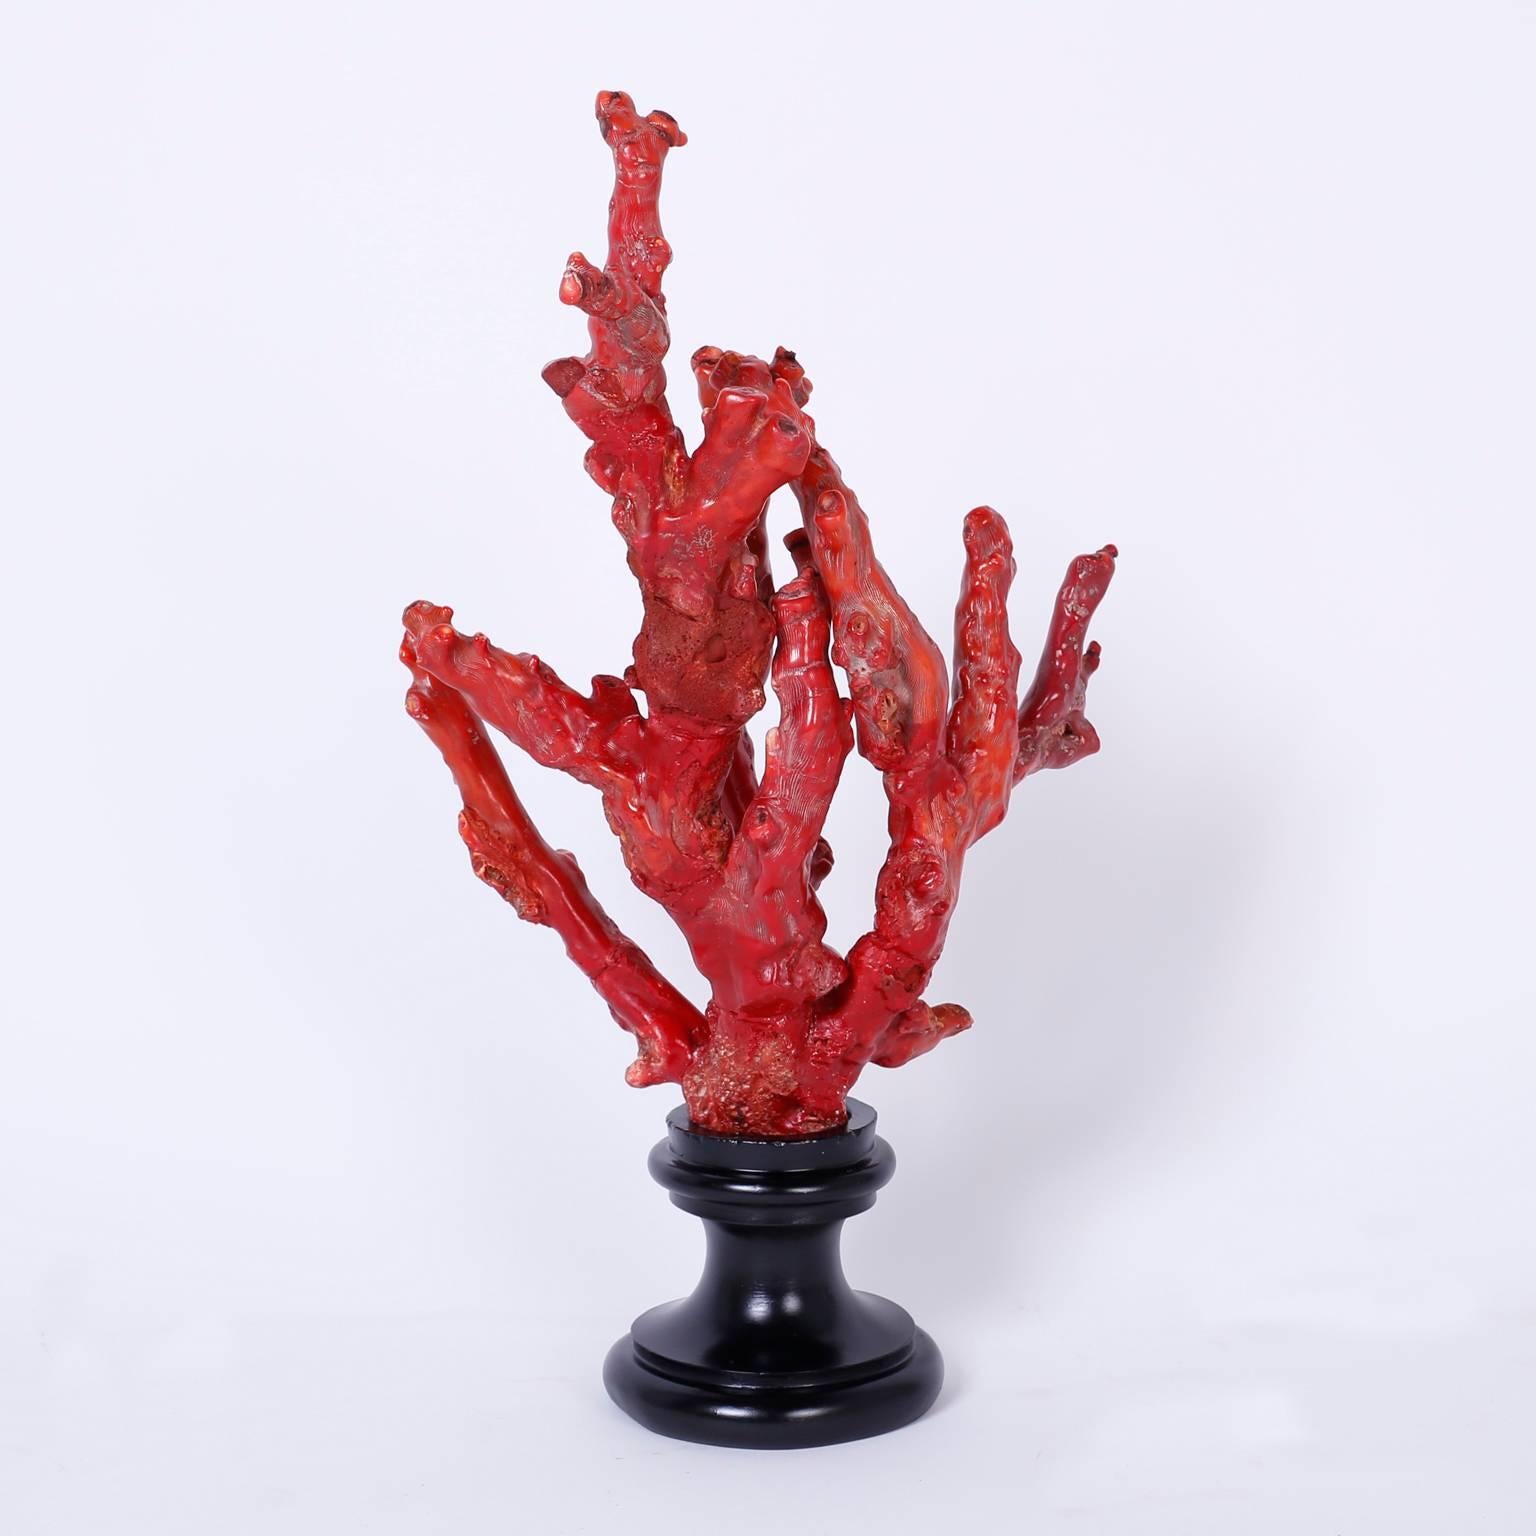 Rare vintage bamboo red coral fossil specimen with inspired organic form and
alluring bold colors. Presented on an ebonized wood base. The base is a later addition.